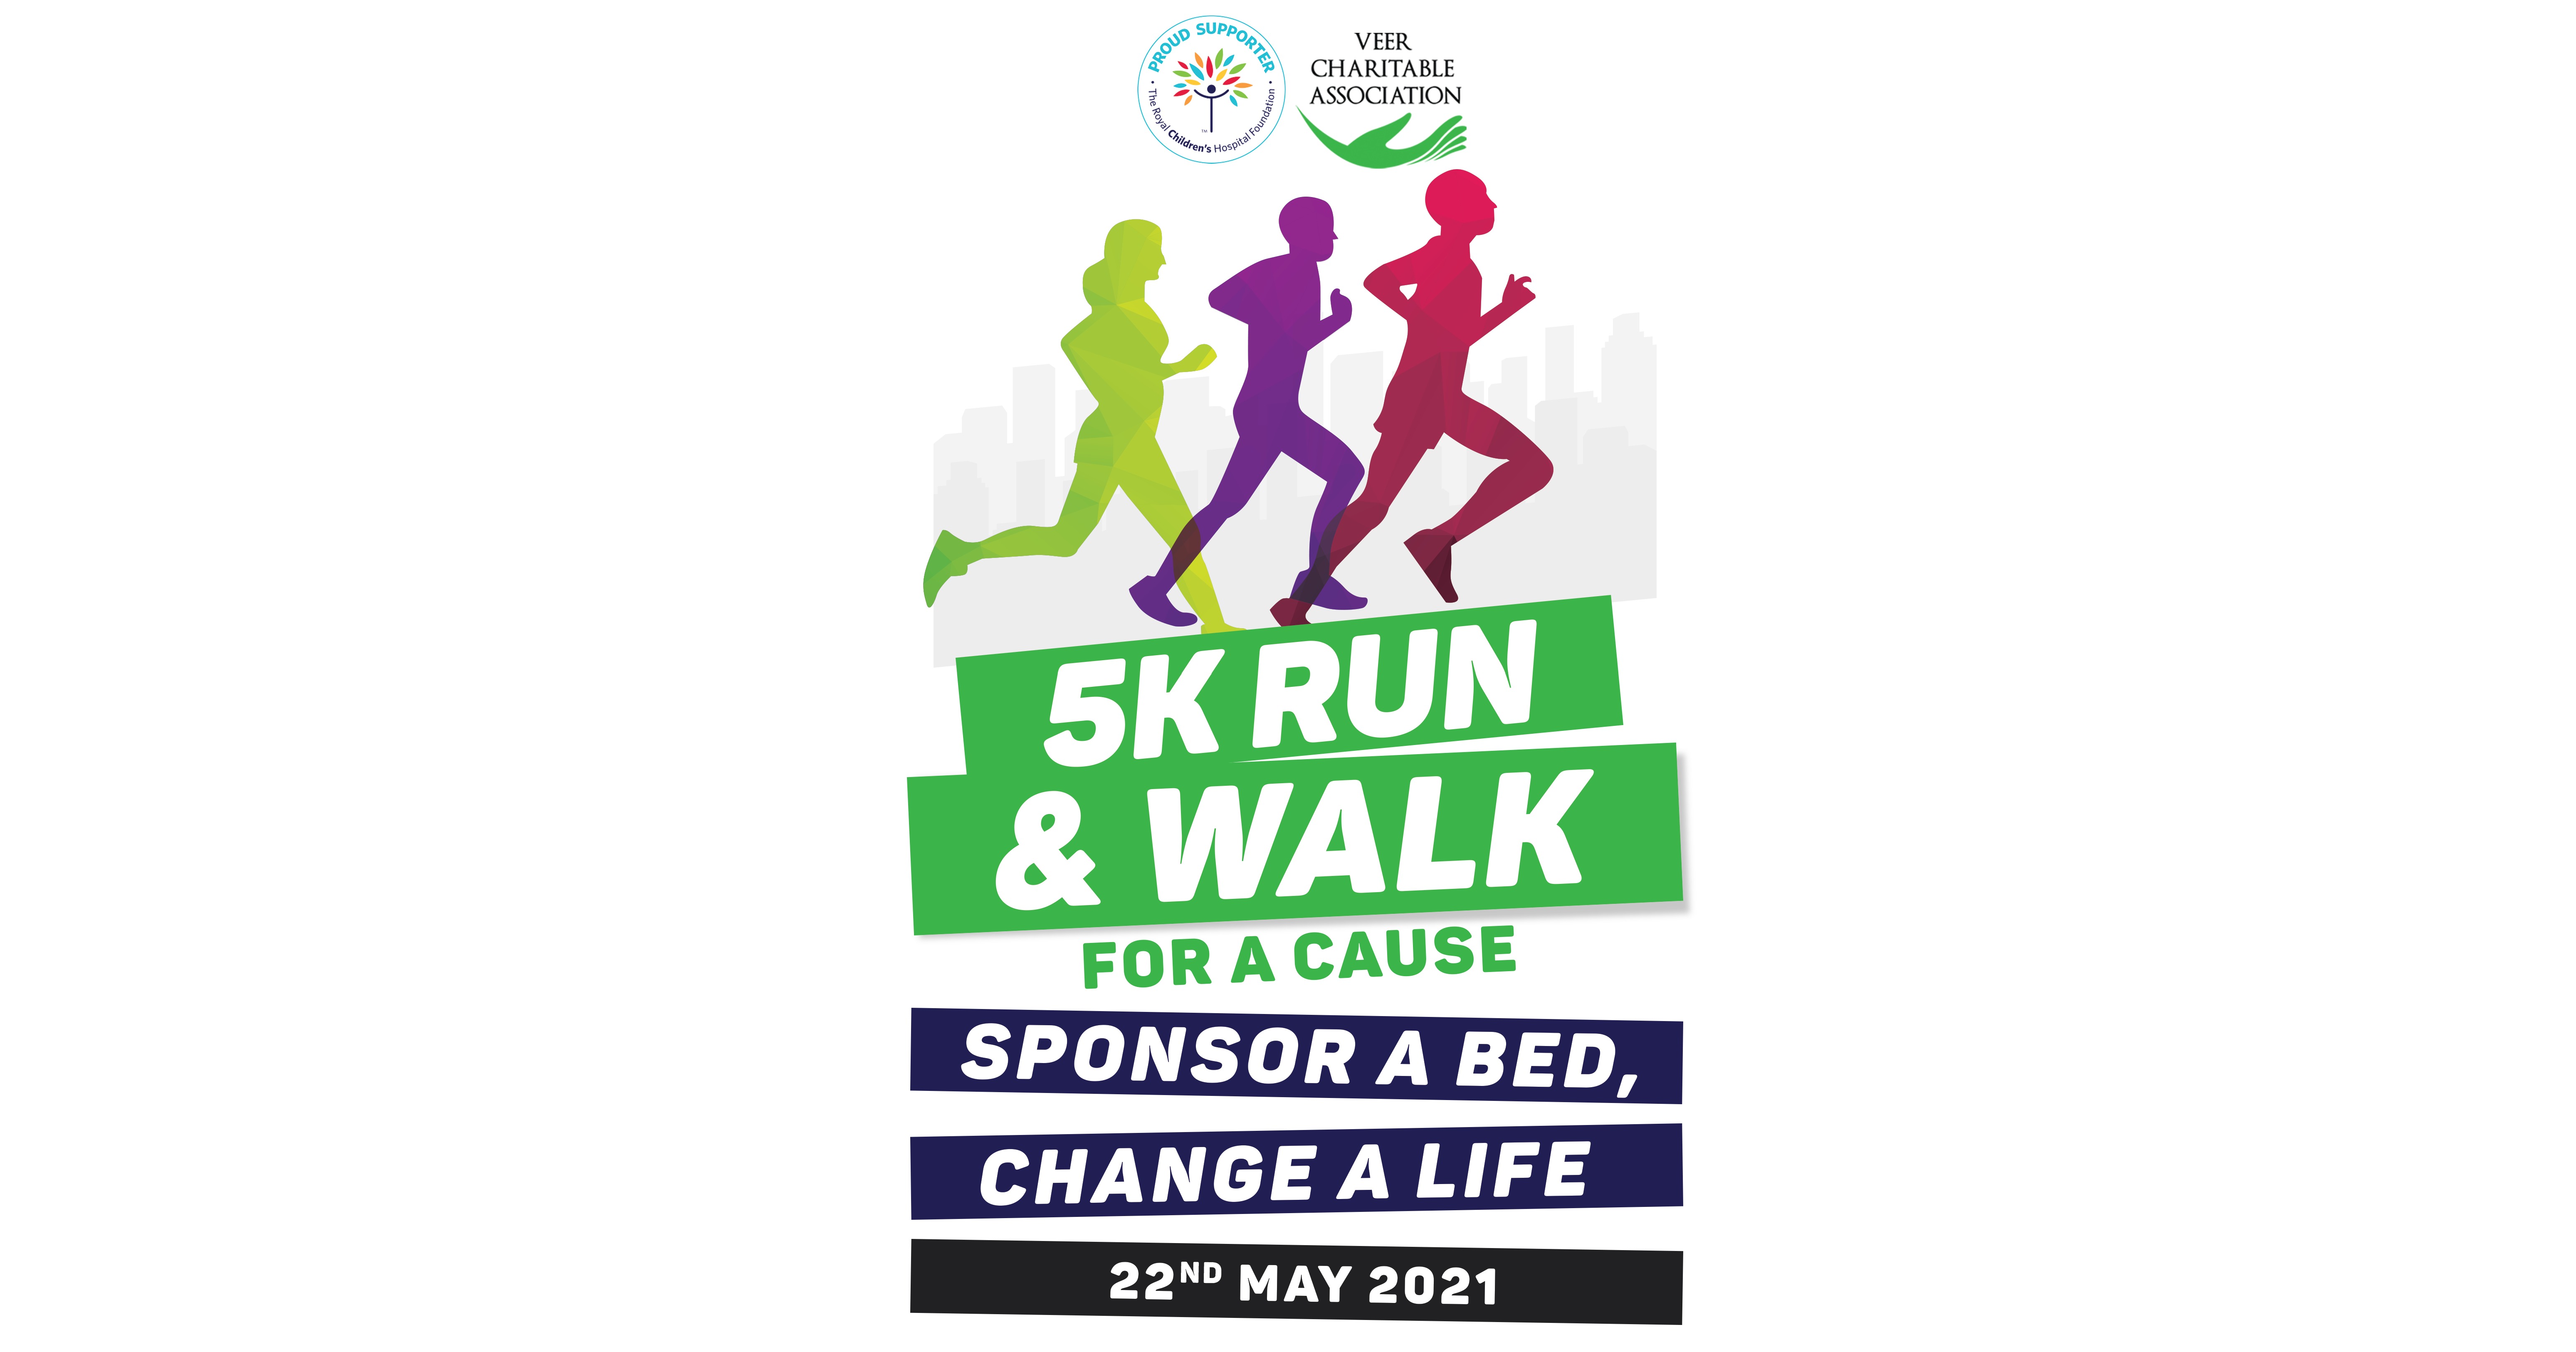 5K Run & Walk for a Cause. Sponsor a bed. Change a life.